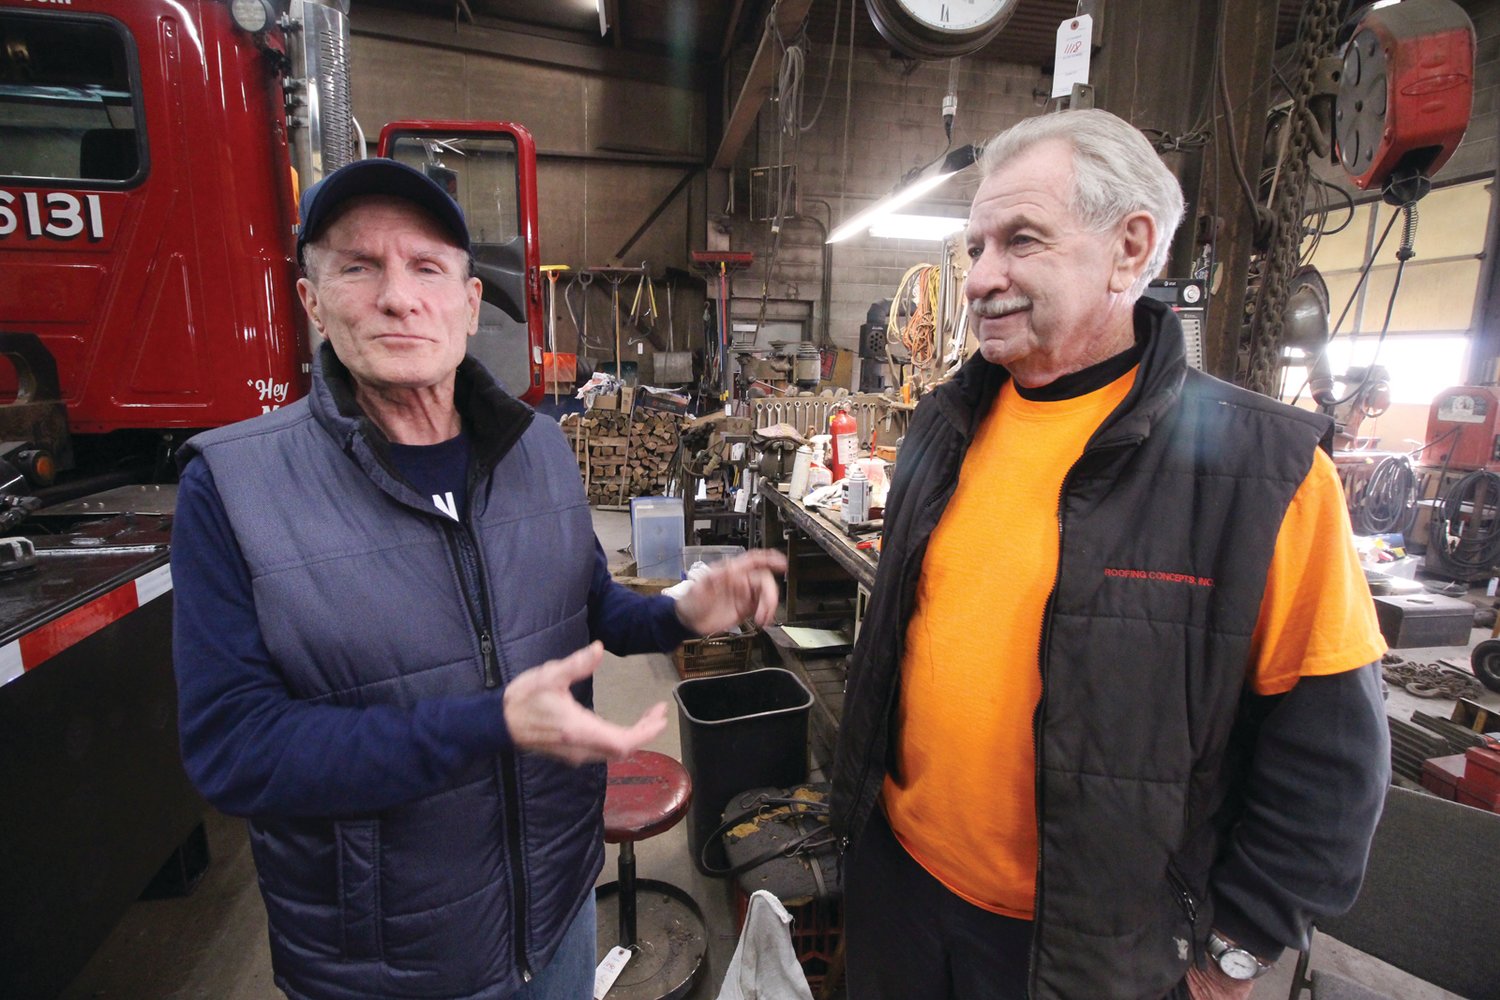 FRIENDLY VISIT:  Jim Walsh (left) stopped by the business to say hi to Butch Guevremont. Walsh, among other family, employees and customers was instrumental in the company’s start up.